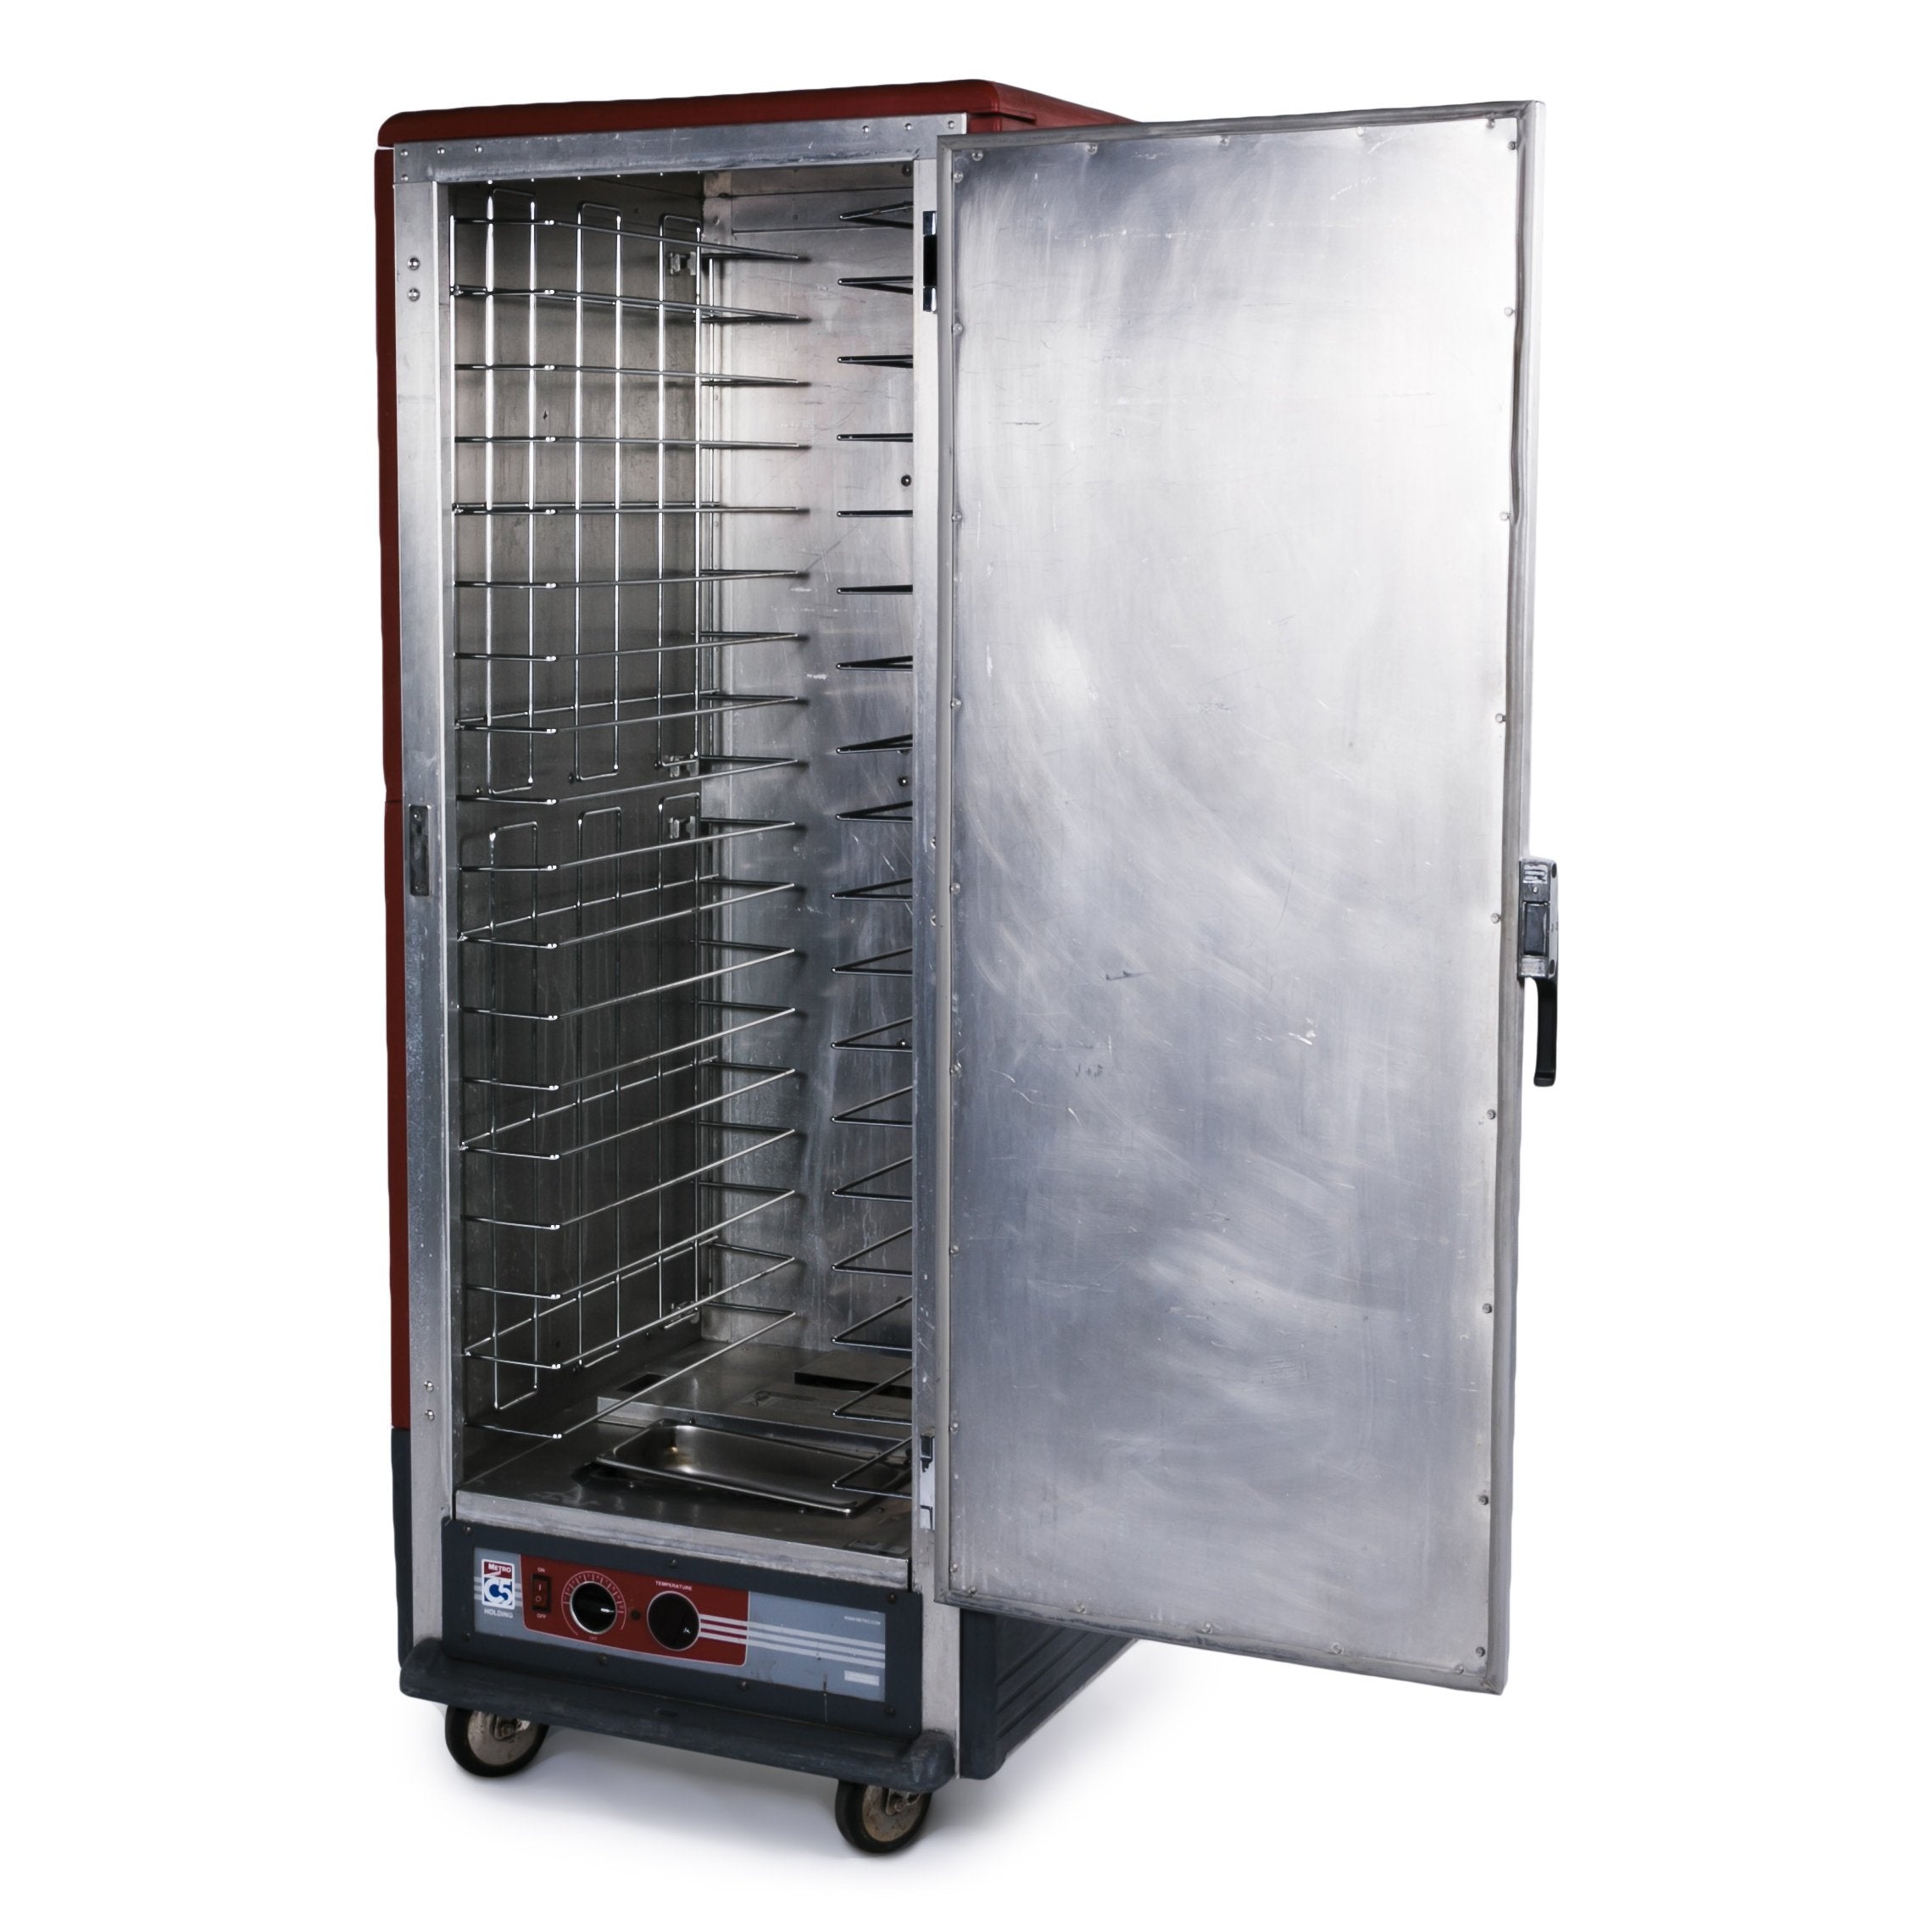 Food warmer/hot box Rentals Canton CT  Where to rent FOOD WARMER/HOT BOX  in Hartford CT, Torrington, Winsted, Farmington Valley